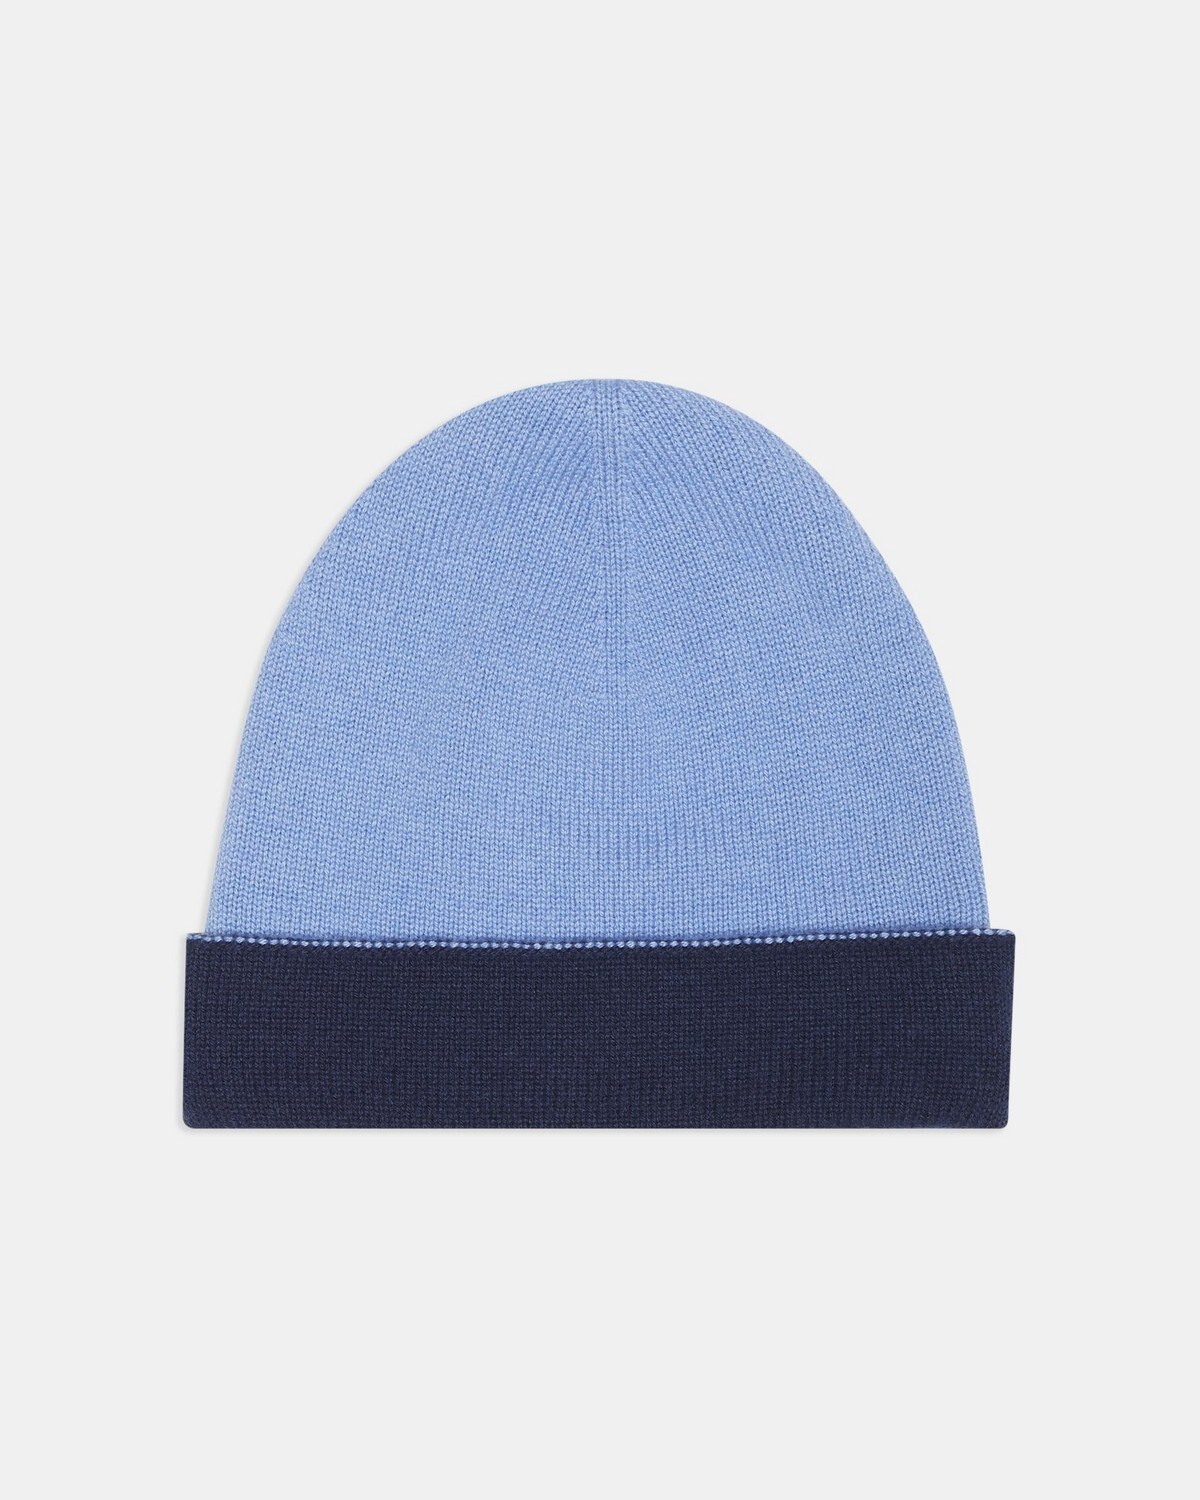 Theory Bi-Color Beanie in Cashmere